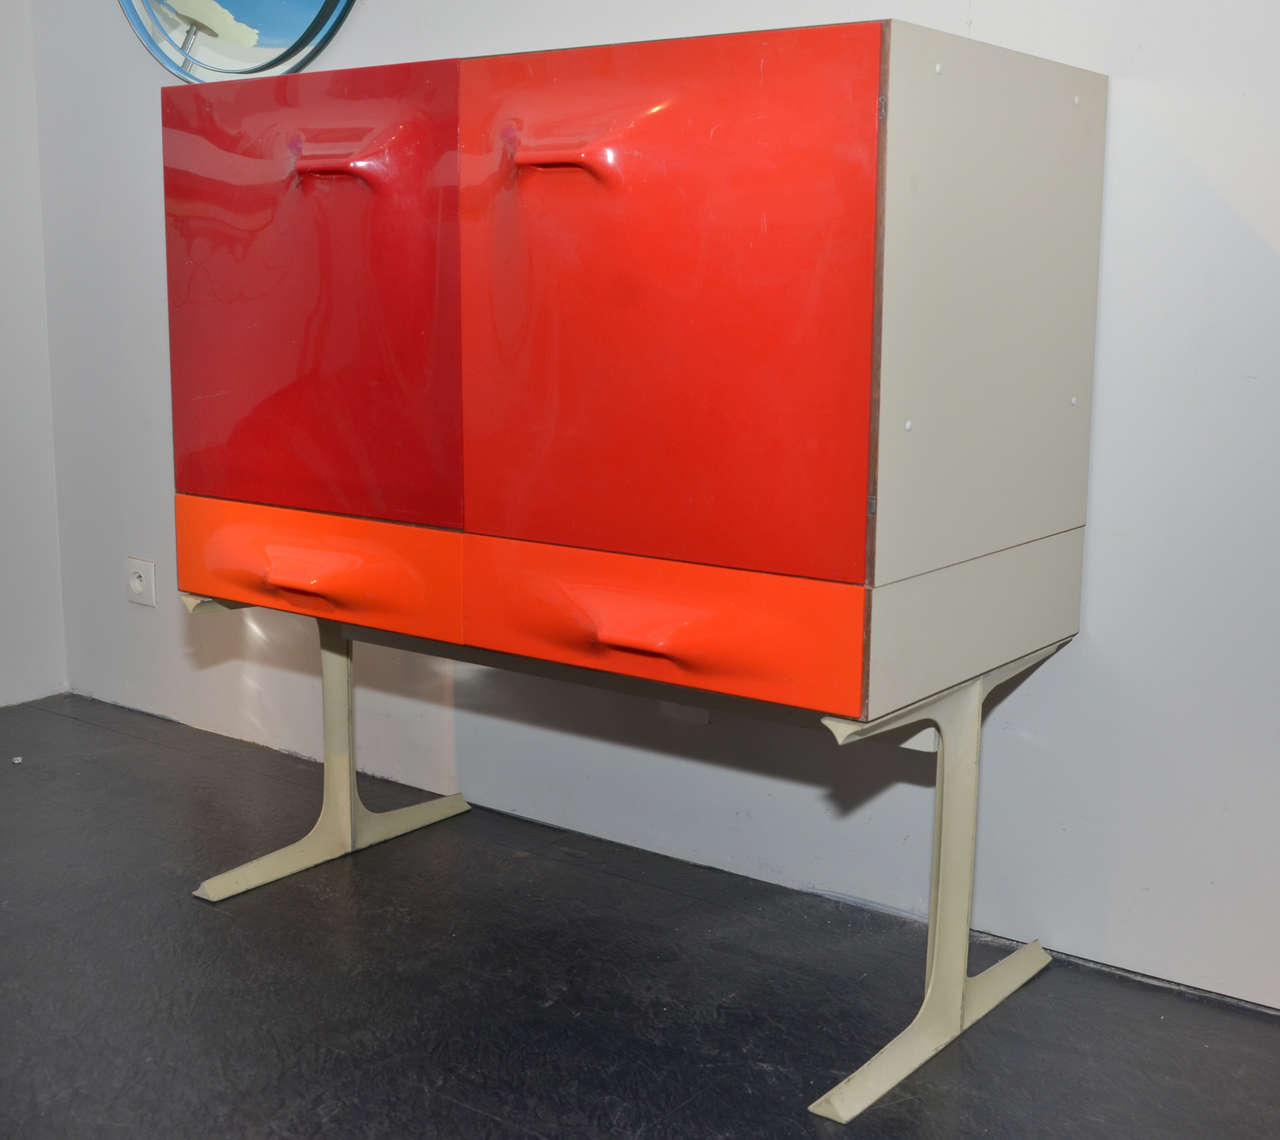 Small 1968 cabinet by  Raymond Loewy Edited by BF 2000 (label in one drawer) in white plywood with doors and drawers in orange and red thermo-shaped ABS ; cast iron legs; four interior drawers in orange and yellow lacquered wood.